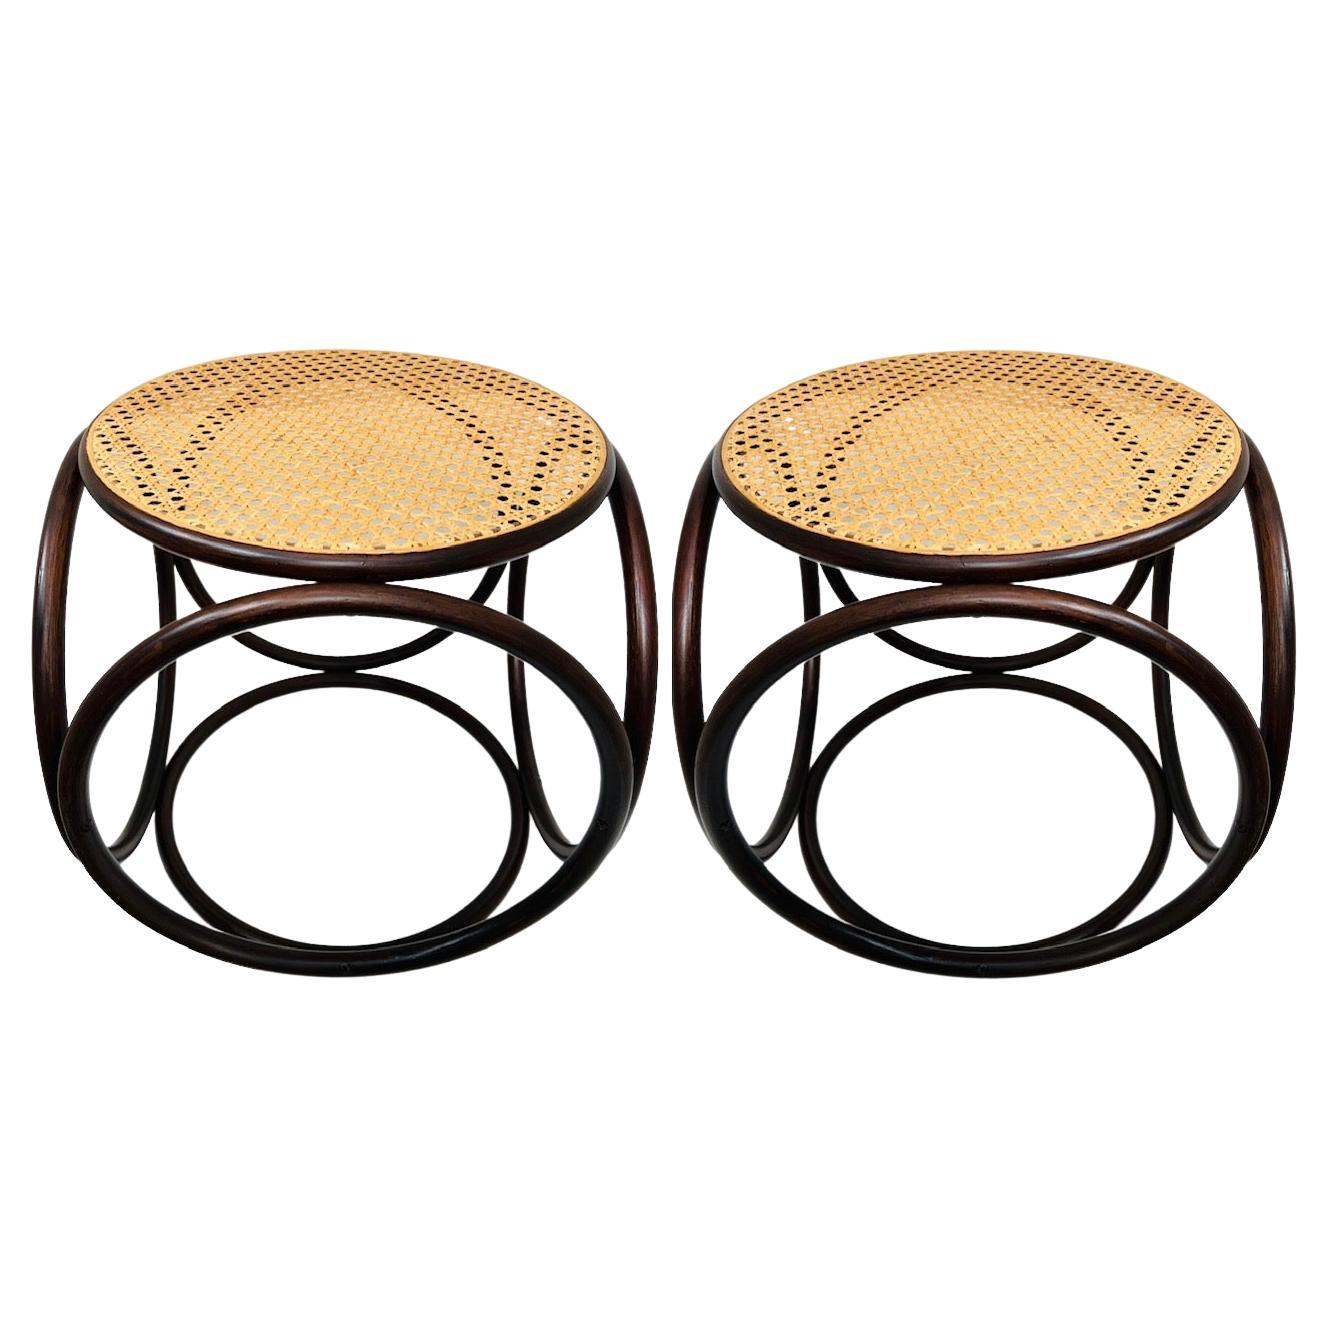 Pair of Mid-Century Modern Bentwood and Cane Minimalist Side Tables